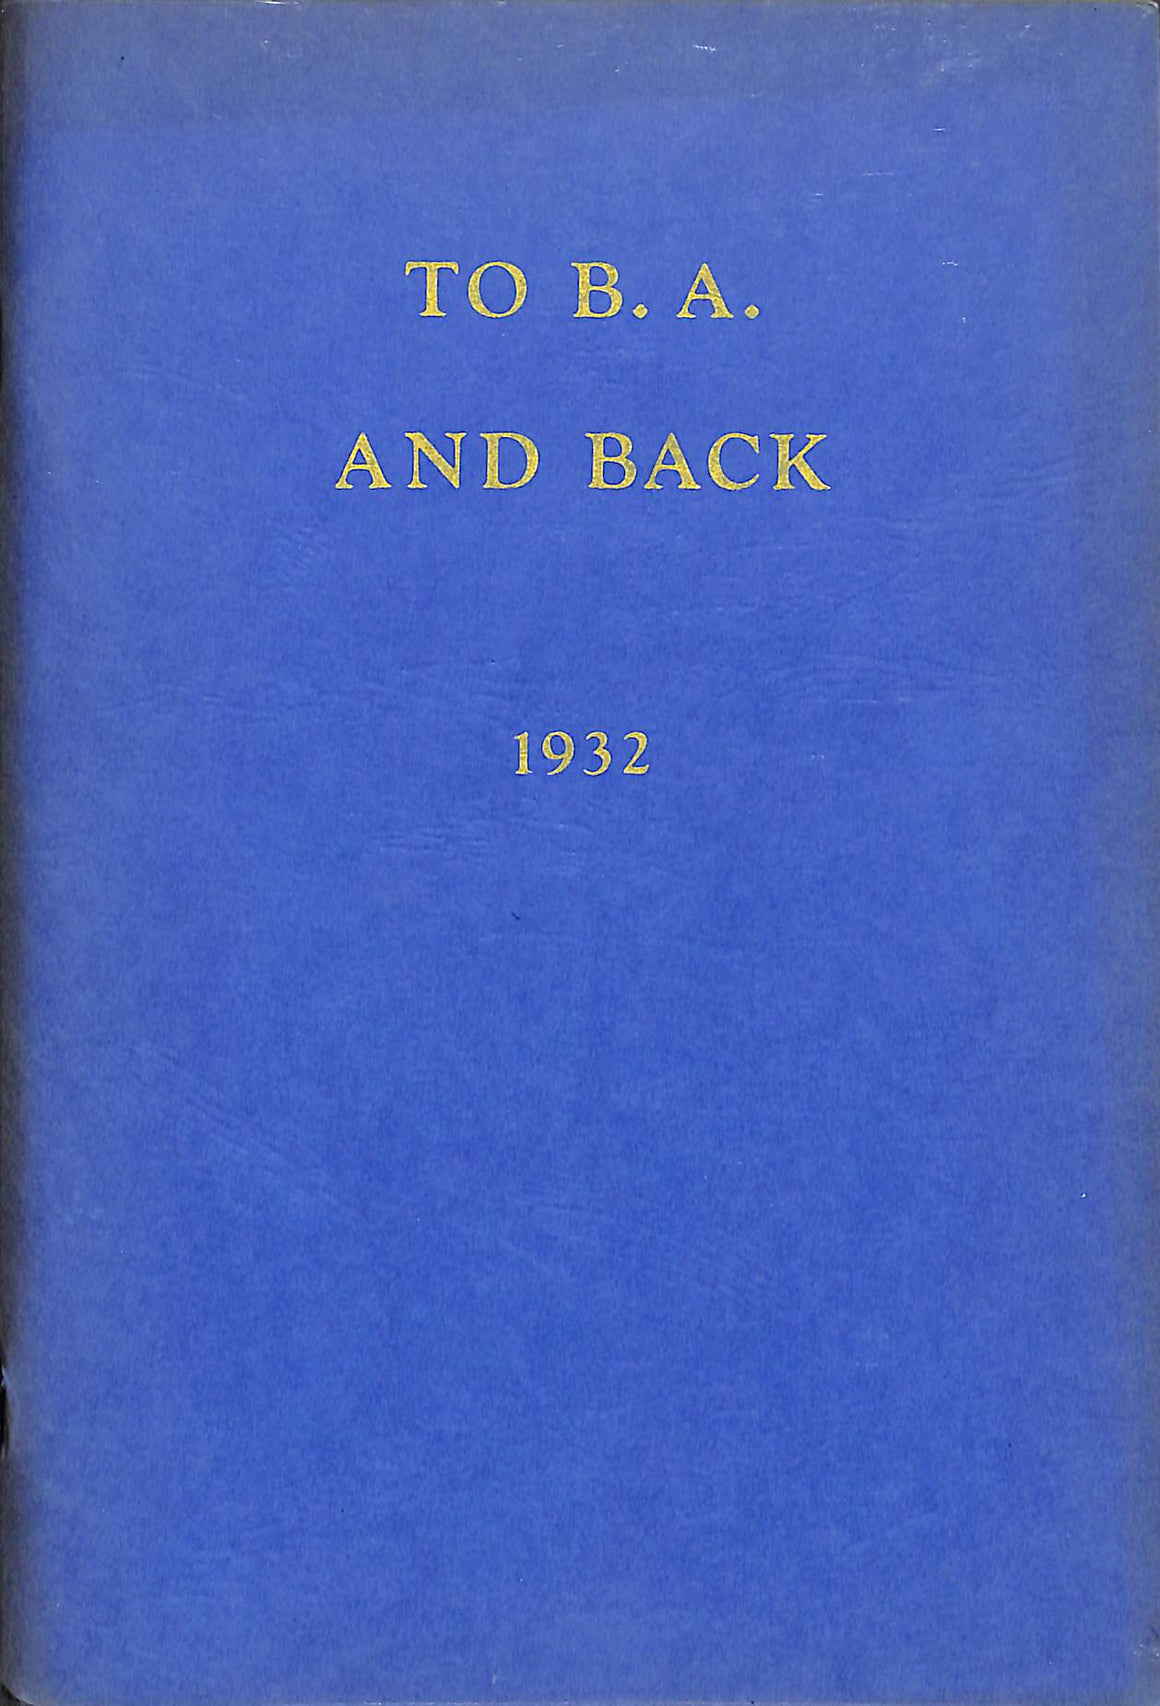 "To B. A. And Back 1932" 1969 KNOX, Seymour H.